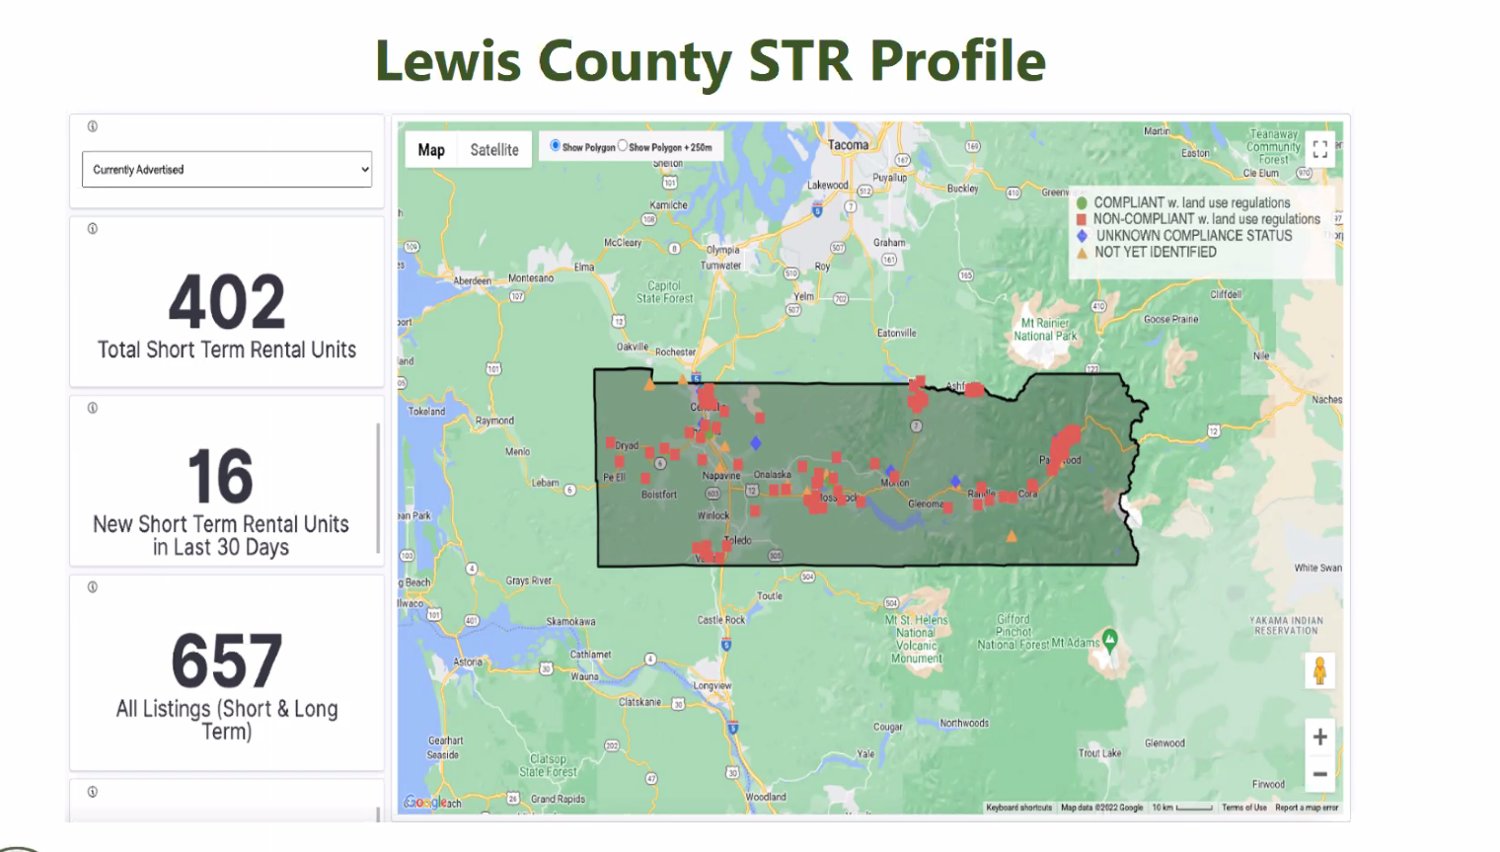 This image provided by Lewis County show where short term rentals are located.